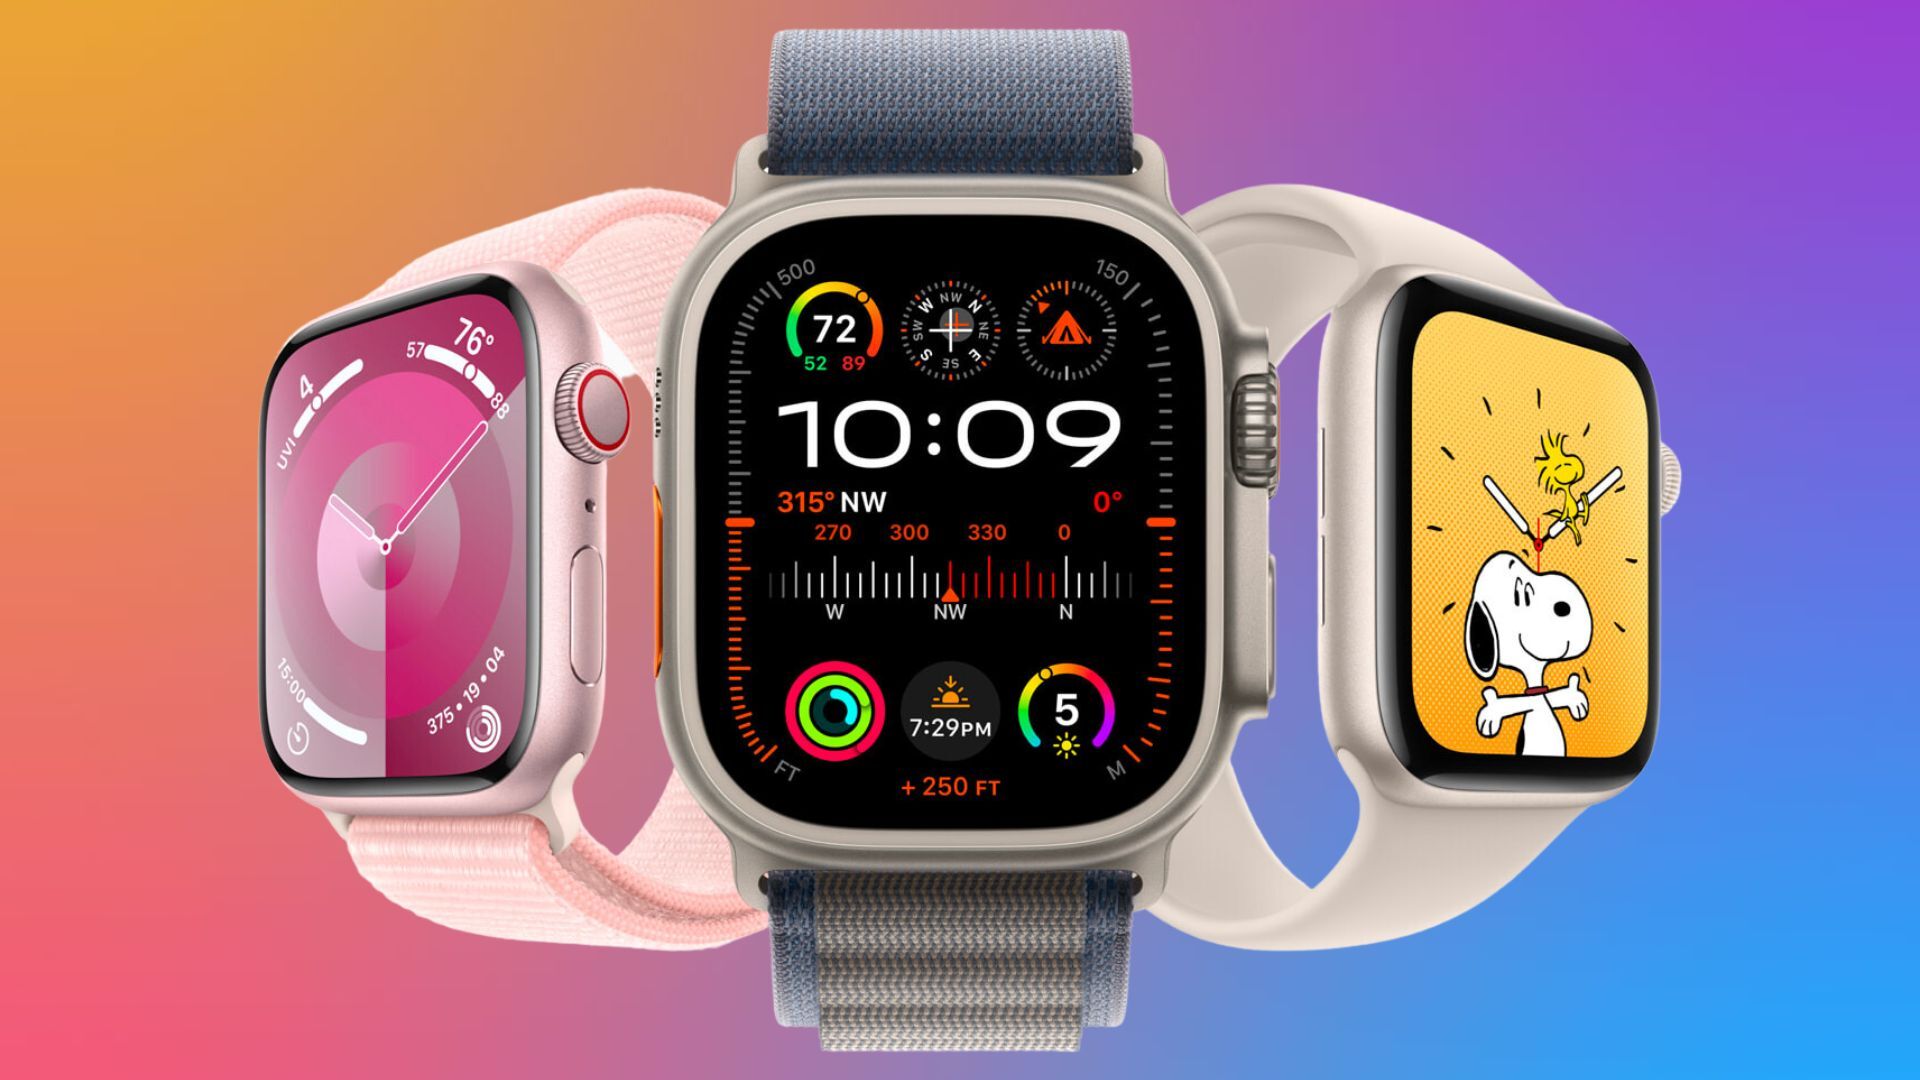 Apple Watch Series 7: Here are all the Colors and Official Band Options